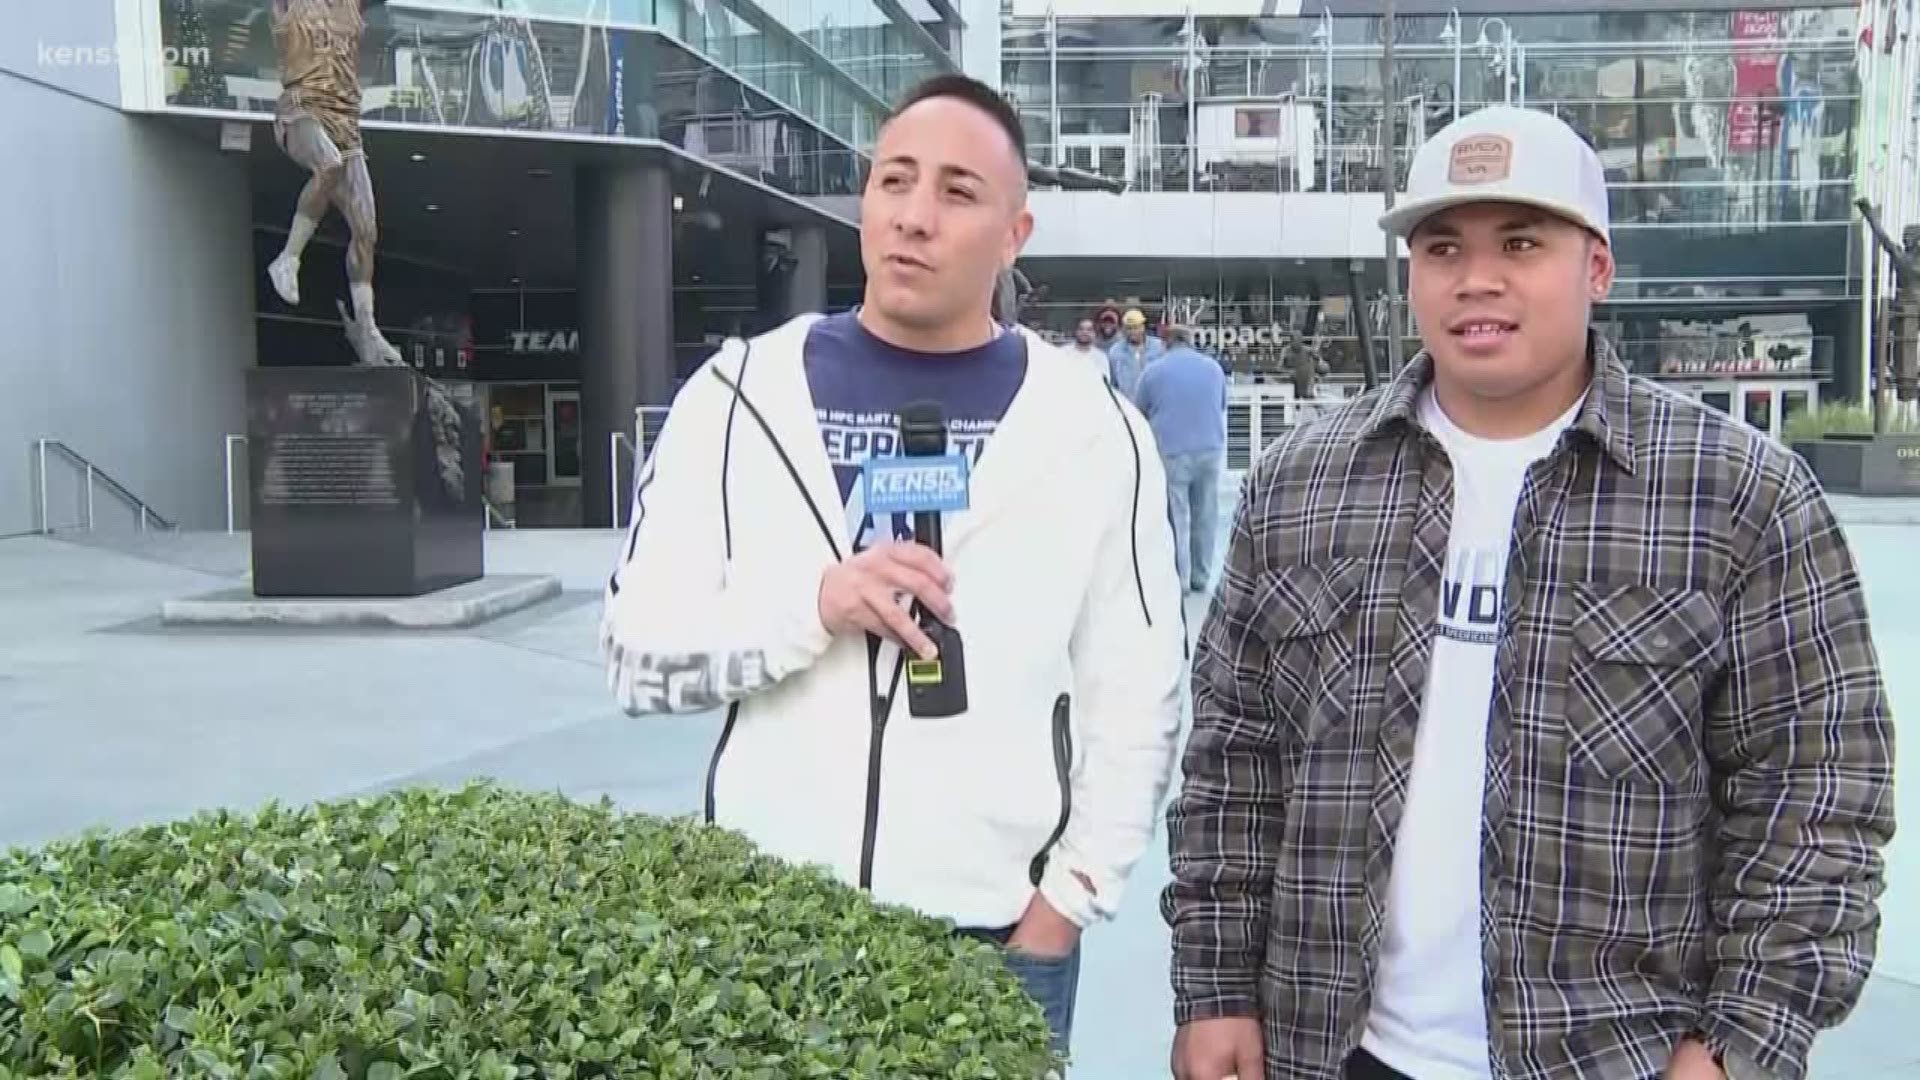 KENS 5 sports reporter Evan Closky went to the LA Live area downtown to talk with some football fans the day before the Rams host the Cowboys.